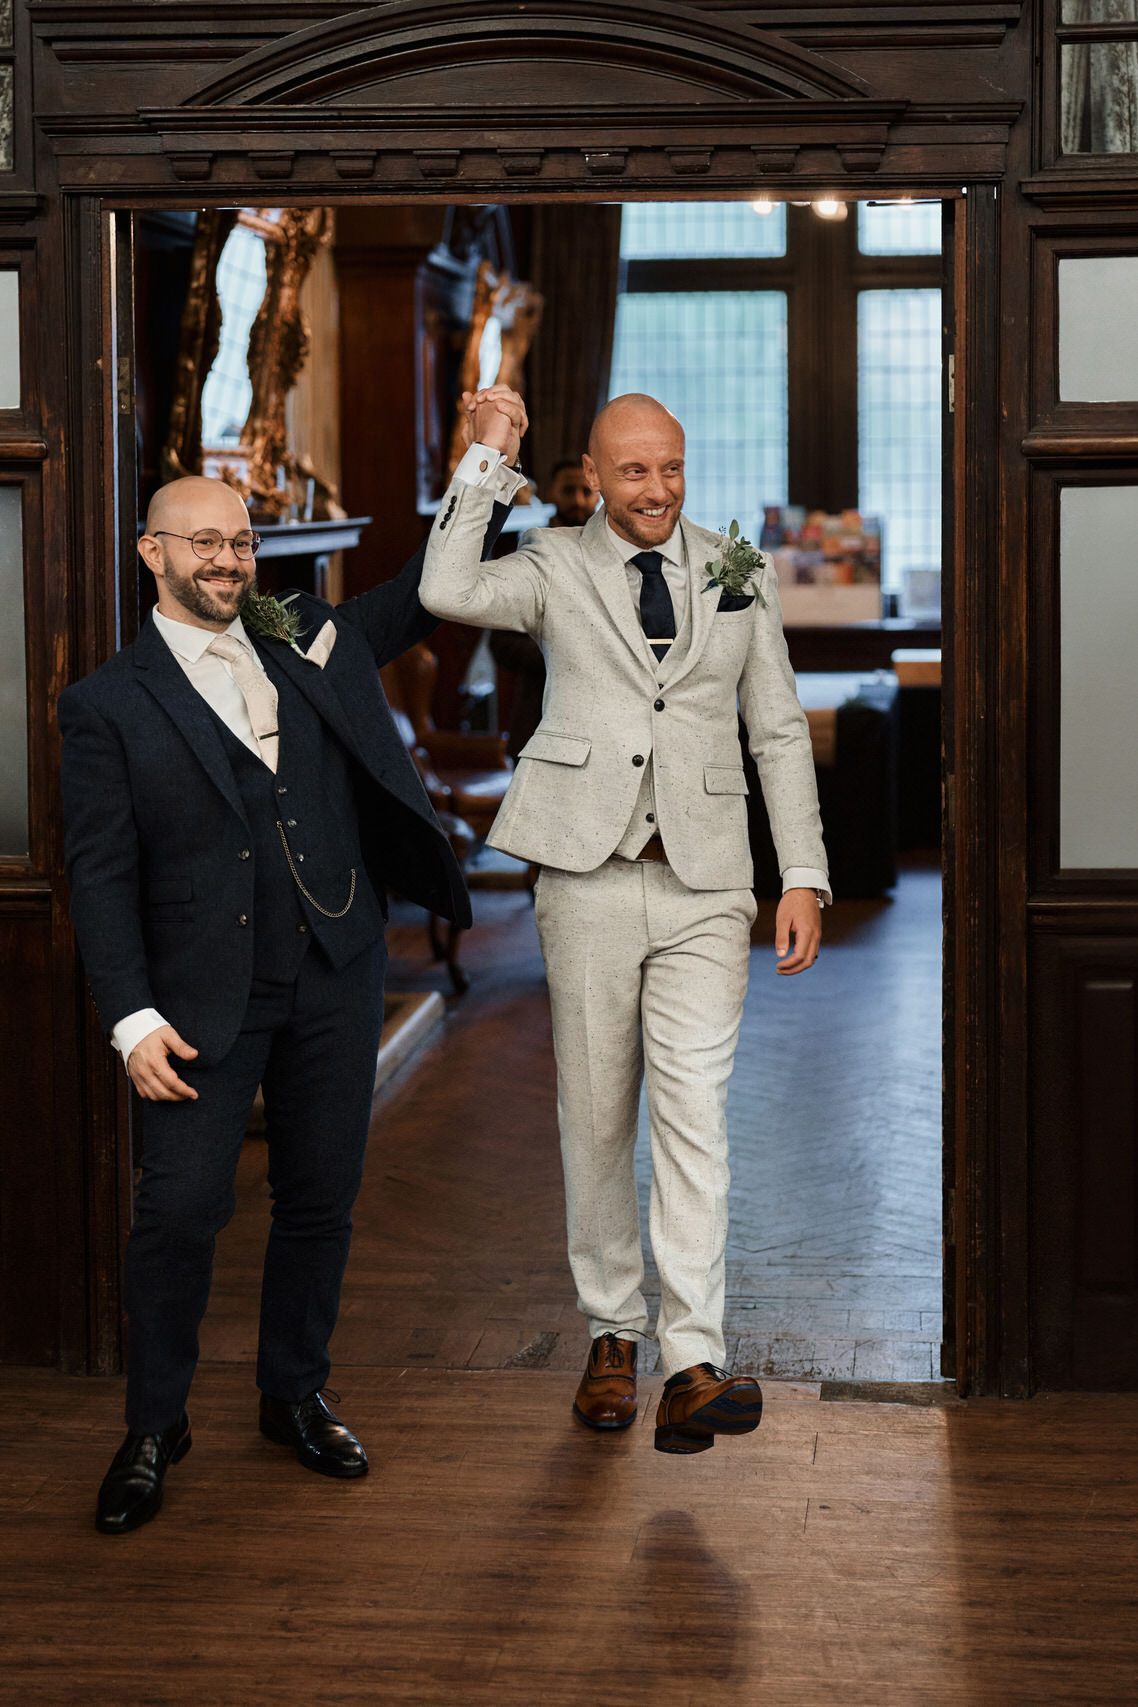 Two guys in suits stepping out from a door.